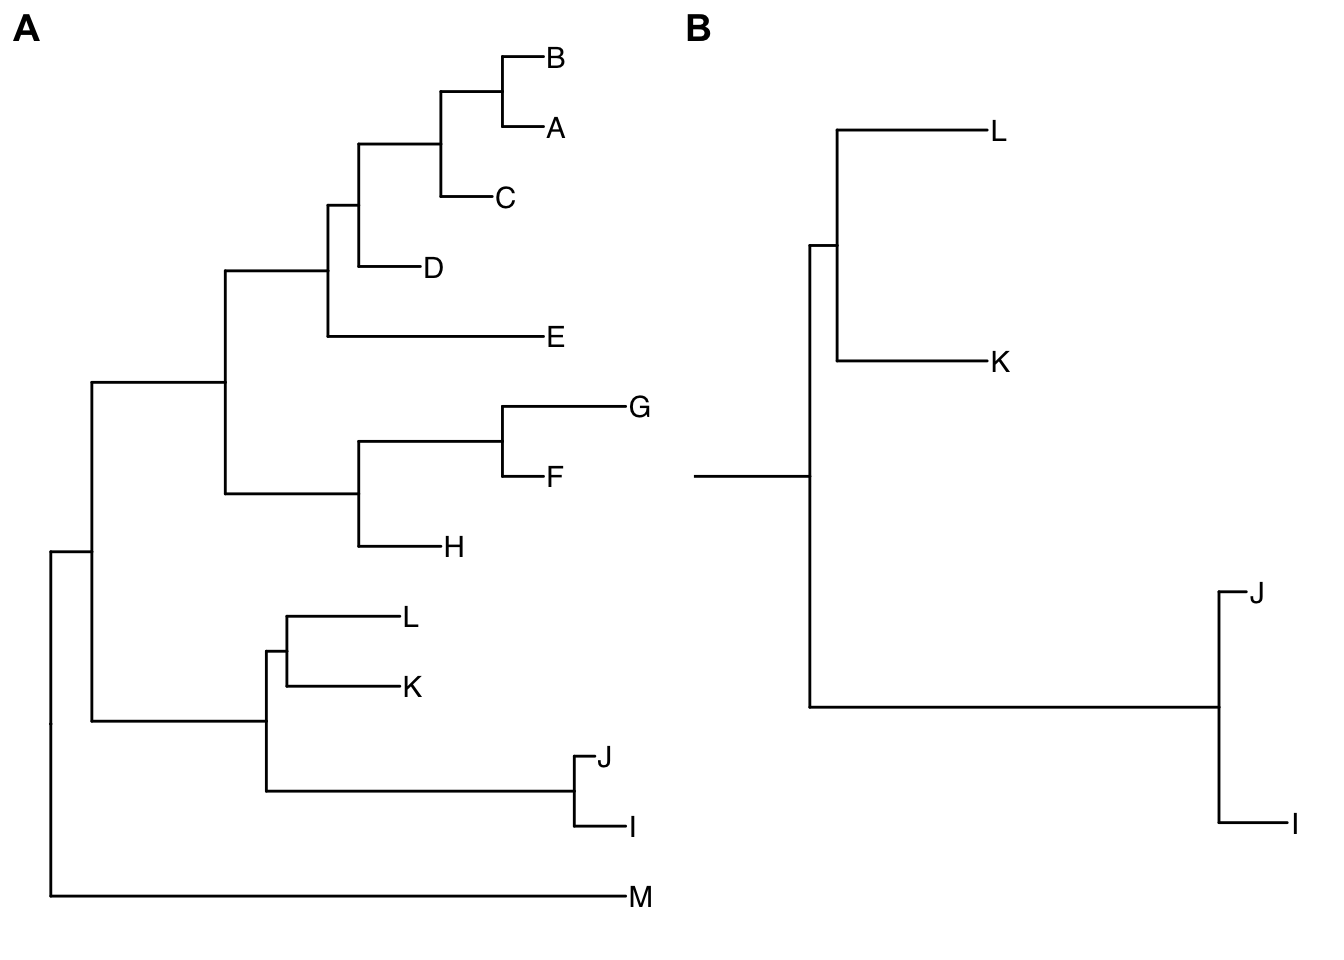 Viewing a selected clade of a tree. An example tree used to demonstrate how ggtree support exploring or manipulating phylogenetic tree visually (A). The ggtree supports visualizing selected clade (B). A clade can be selected by specifying a node number or determined by most recent common ancestor of selected tips.